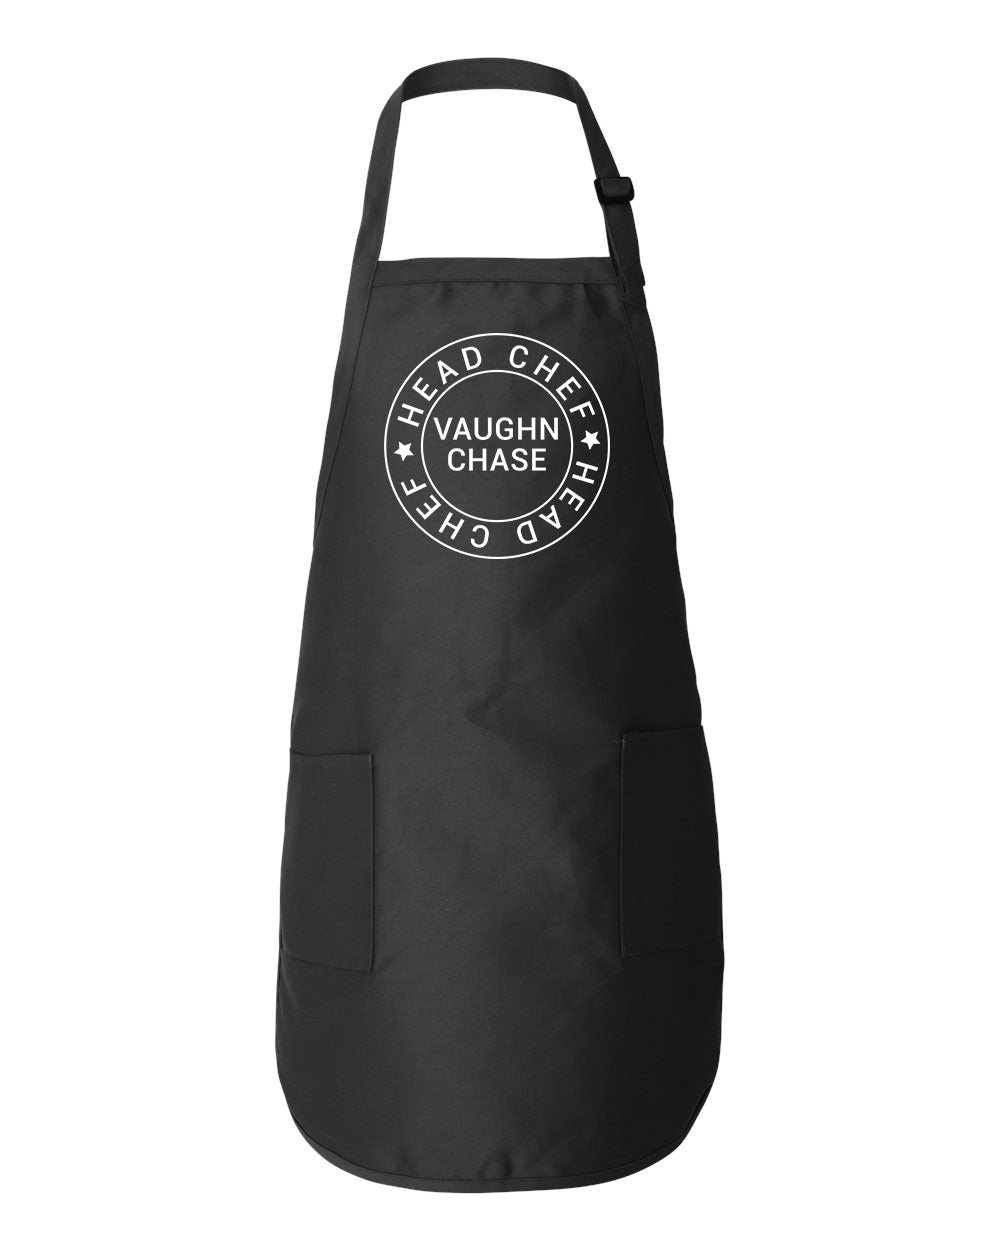 Head Chef Personalized Apron gifts